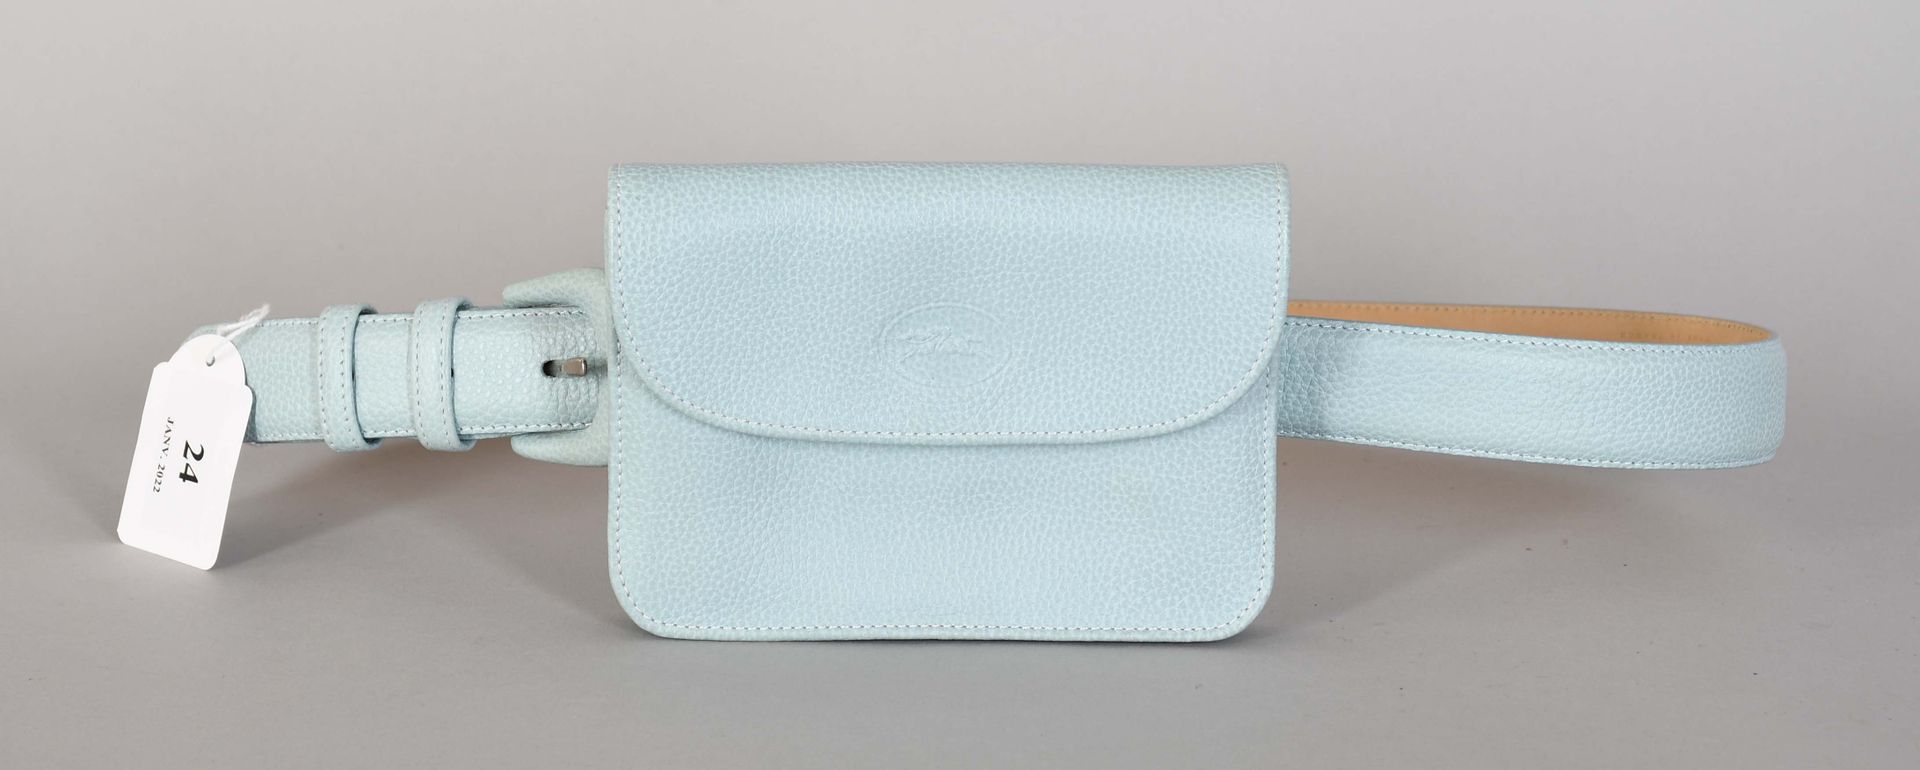 Null Longchamp

Light blue grained leather clutch with removable belt. New.